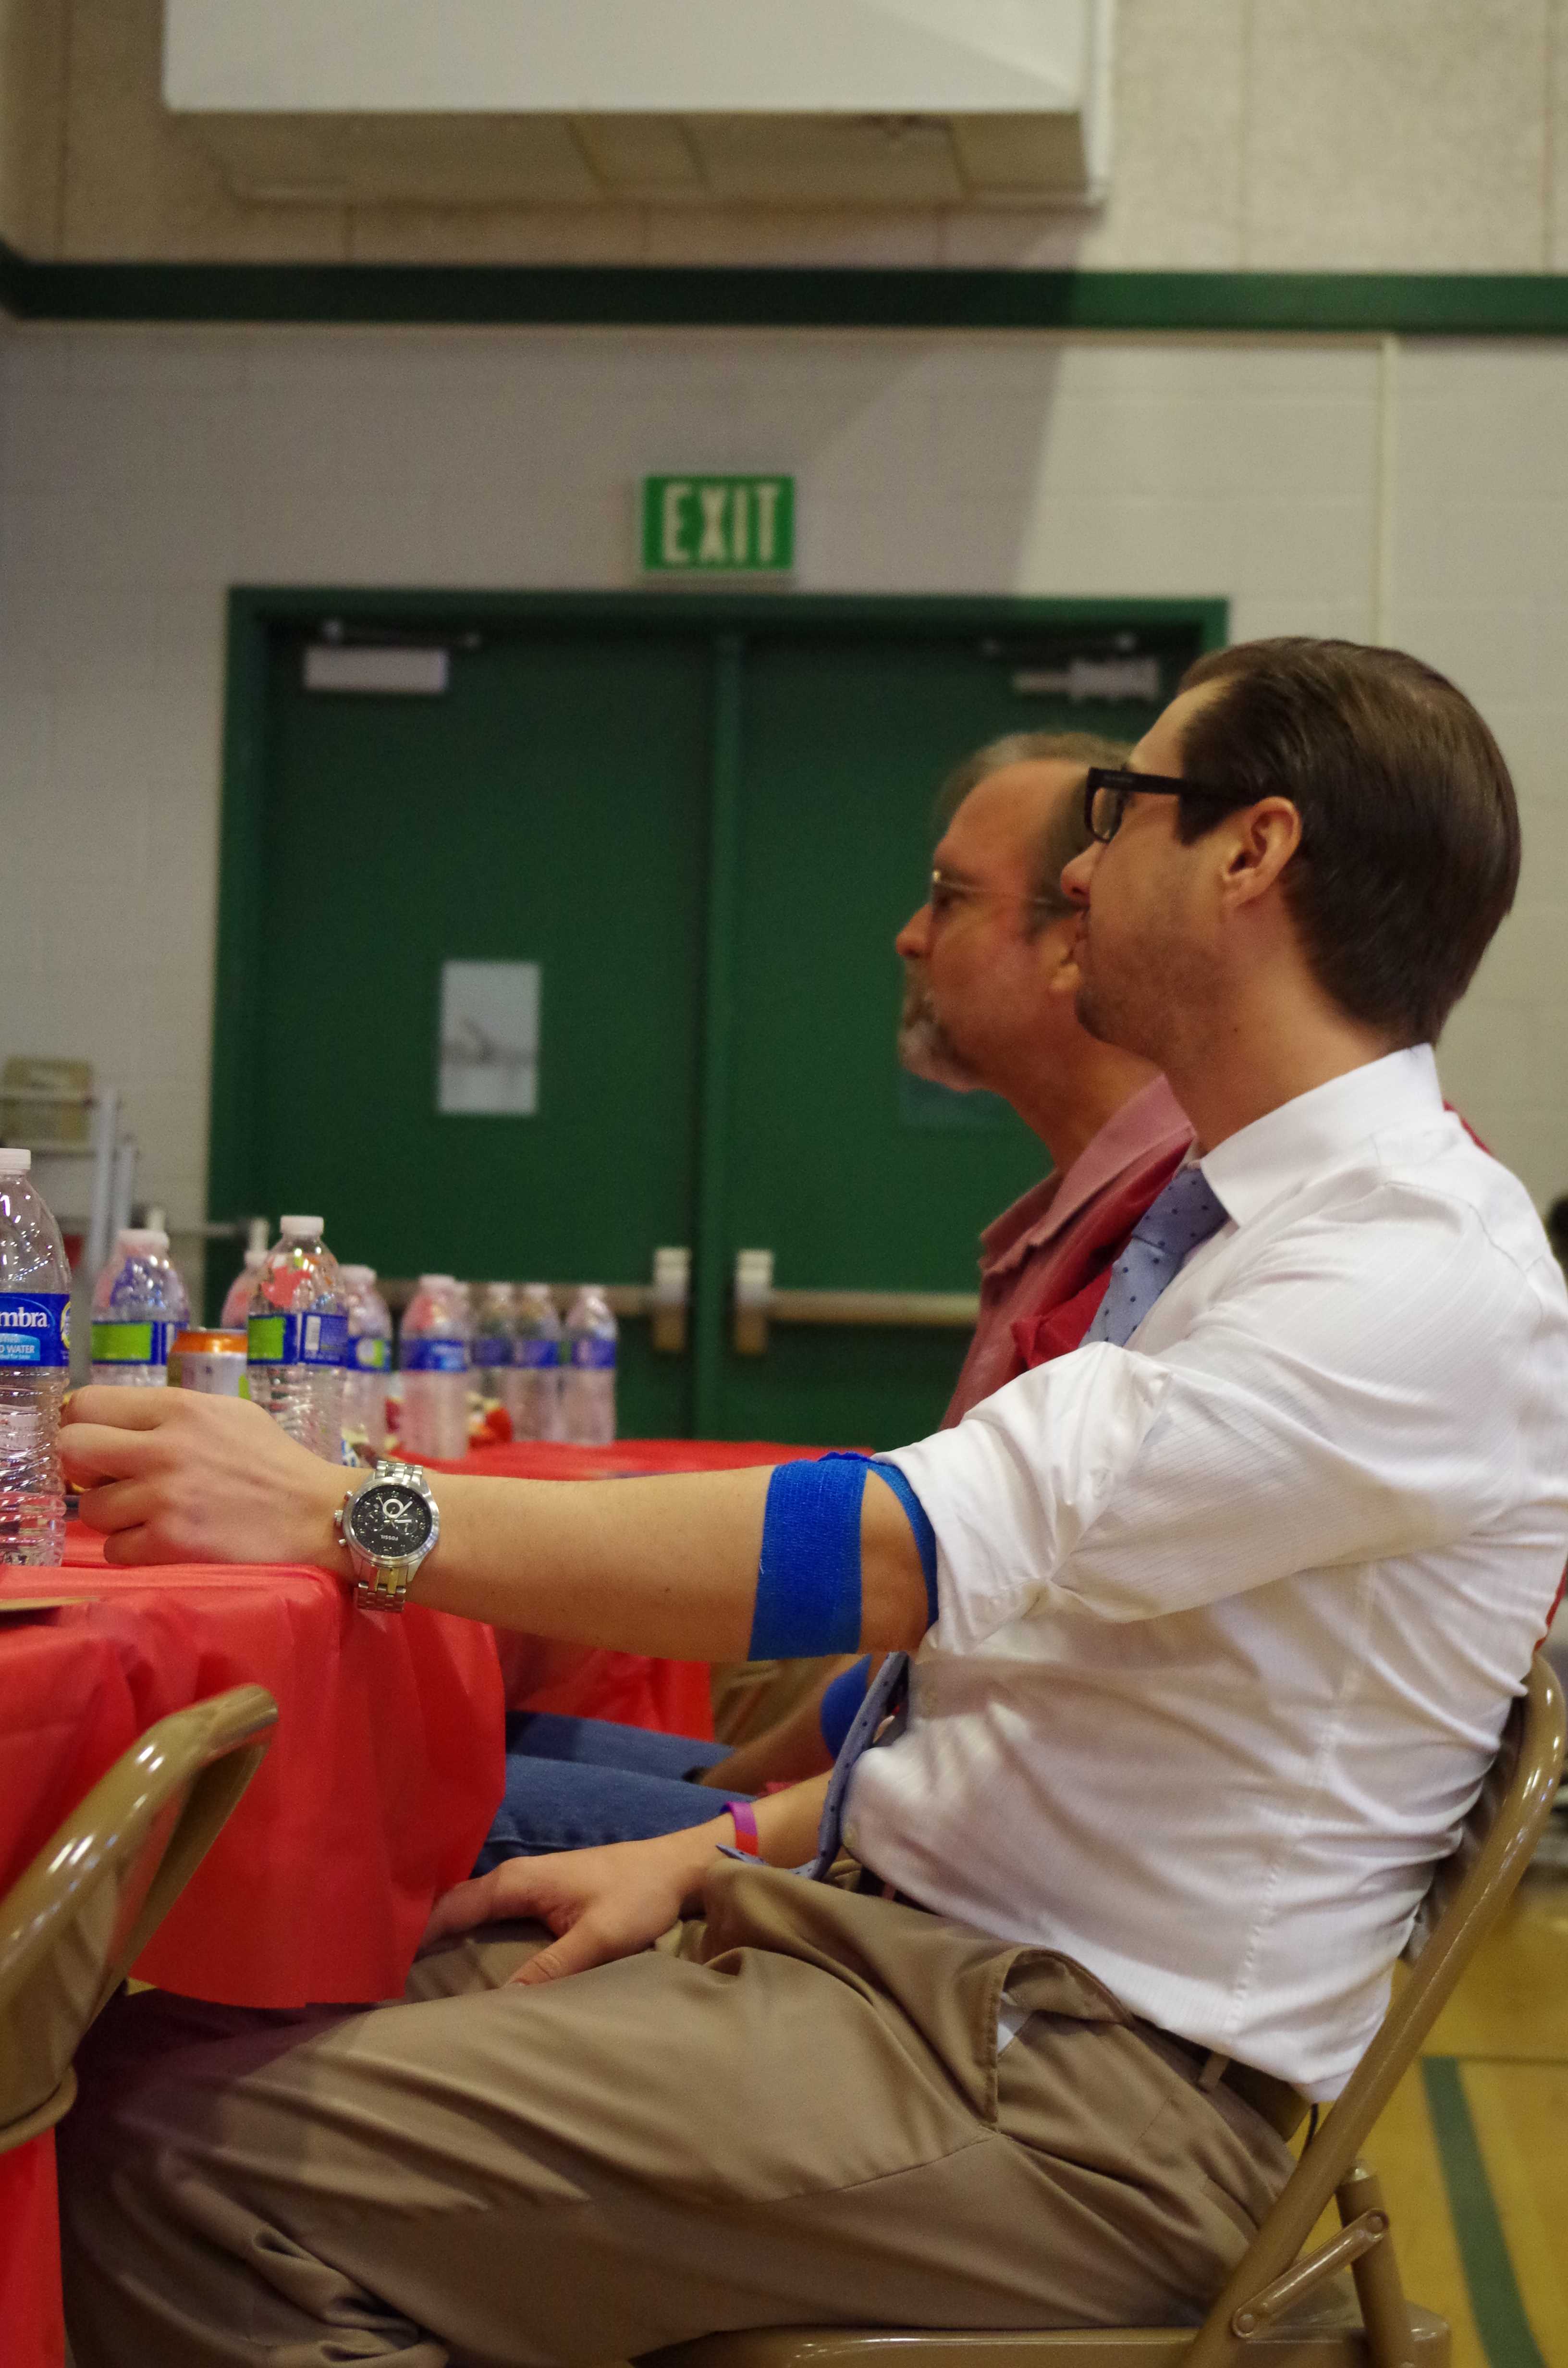 EAT YOUR HEART OUT:  Although school is going on, Mr. Andrew Phillips eats cookies and drinks water with Mr. Scott Braly after successfully donating blood on May 23. Once you finish donating blood, Blood Source provides food and water for all volunteers to help avoid side effects of fatigue, dizziness, and various other side effects. “I donate because I have no reason not to. It could potentially save someone’s life and the only thing they ask is for twenty minutes of discomfort. It seems like an easy trade off.” Phillips said. Photo by Kristen Goldman